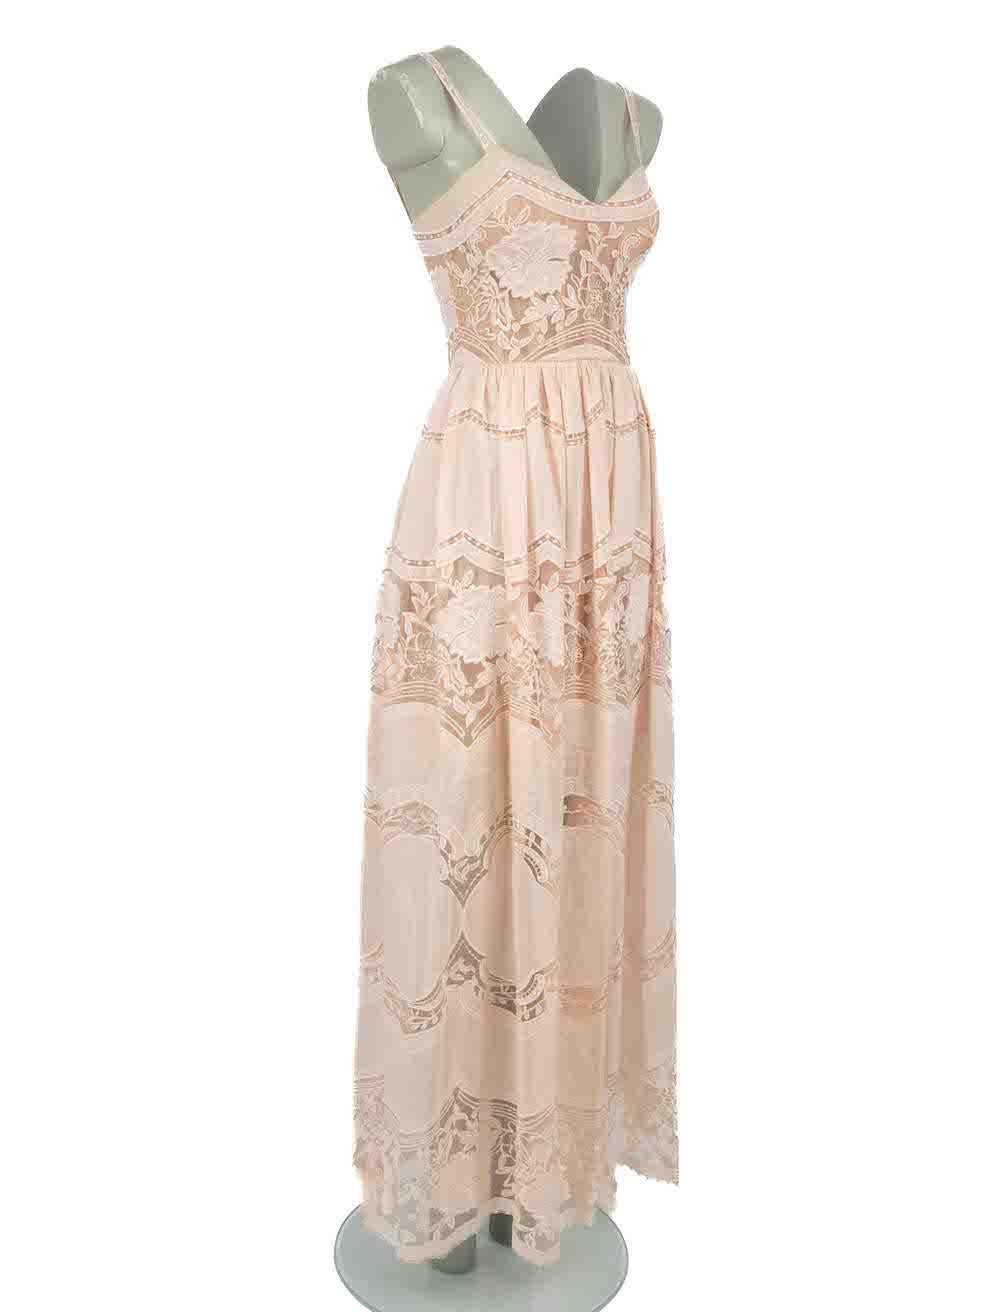 CONDITION is Very good. Minimal wear to dress is evident. Minimal stains on the hem on this used Sandra Mansour designer resale item. This garment would benefit from gentle hand wash.
 
Details
Pink
Lace
Dress
Midi
Sleeveless
Sweetheart